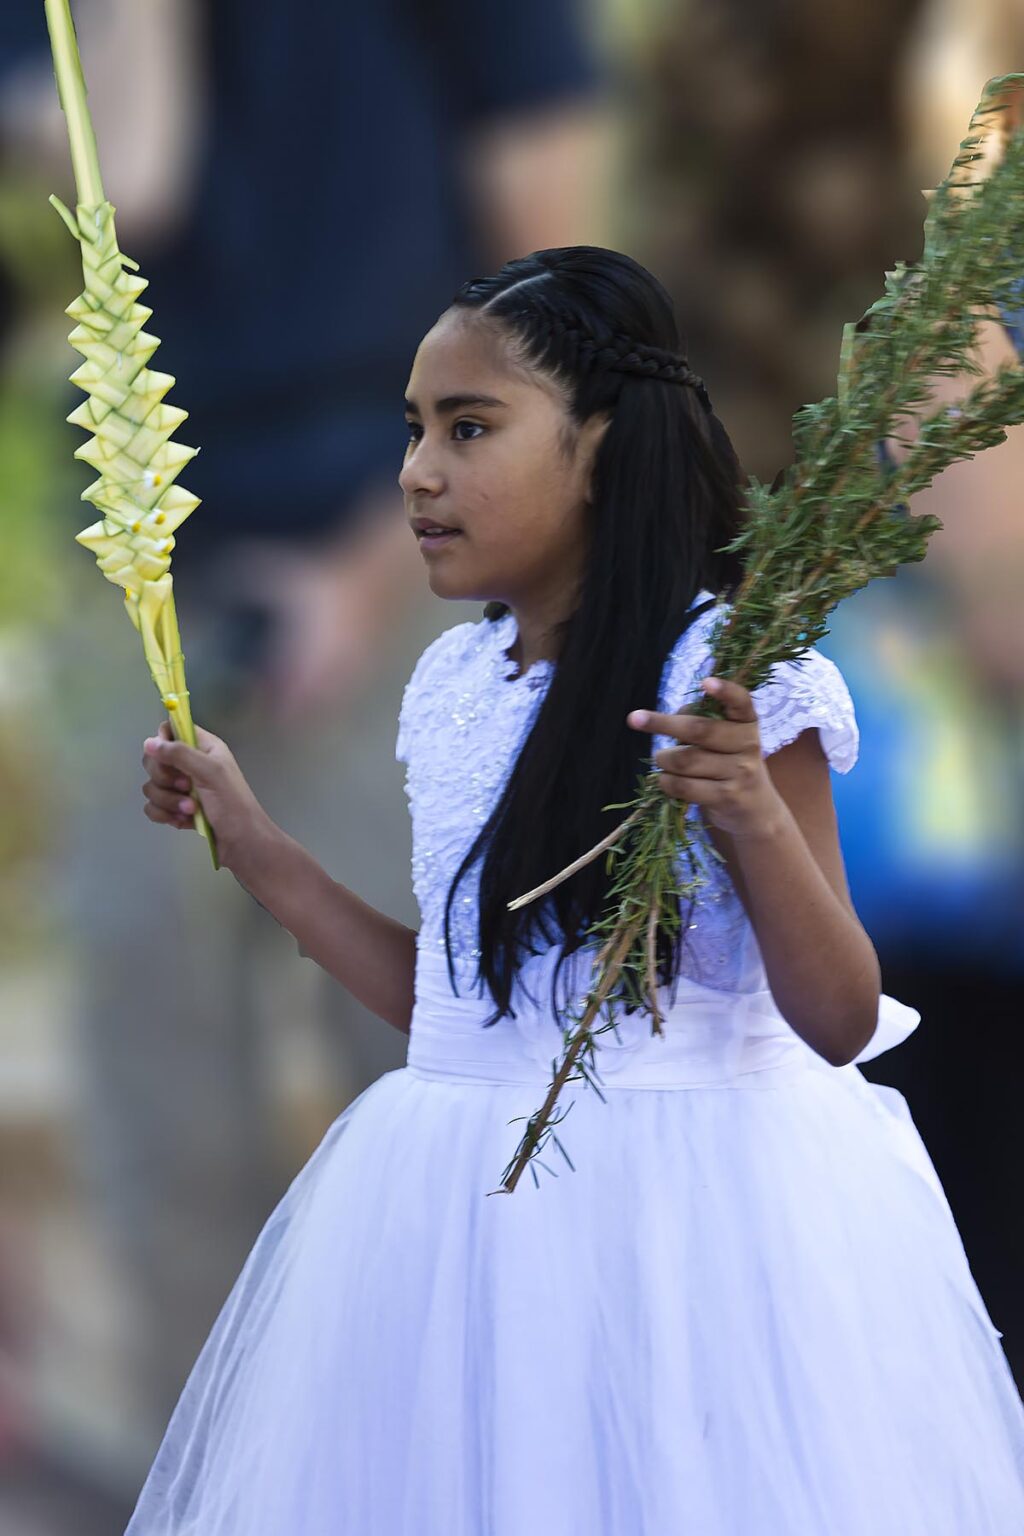 A young woman participates in the PALM SUNDAY procession from Parque Juarez to the Jardin - SAN MIGUEL DE ALLENDE, MEXICO